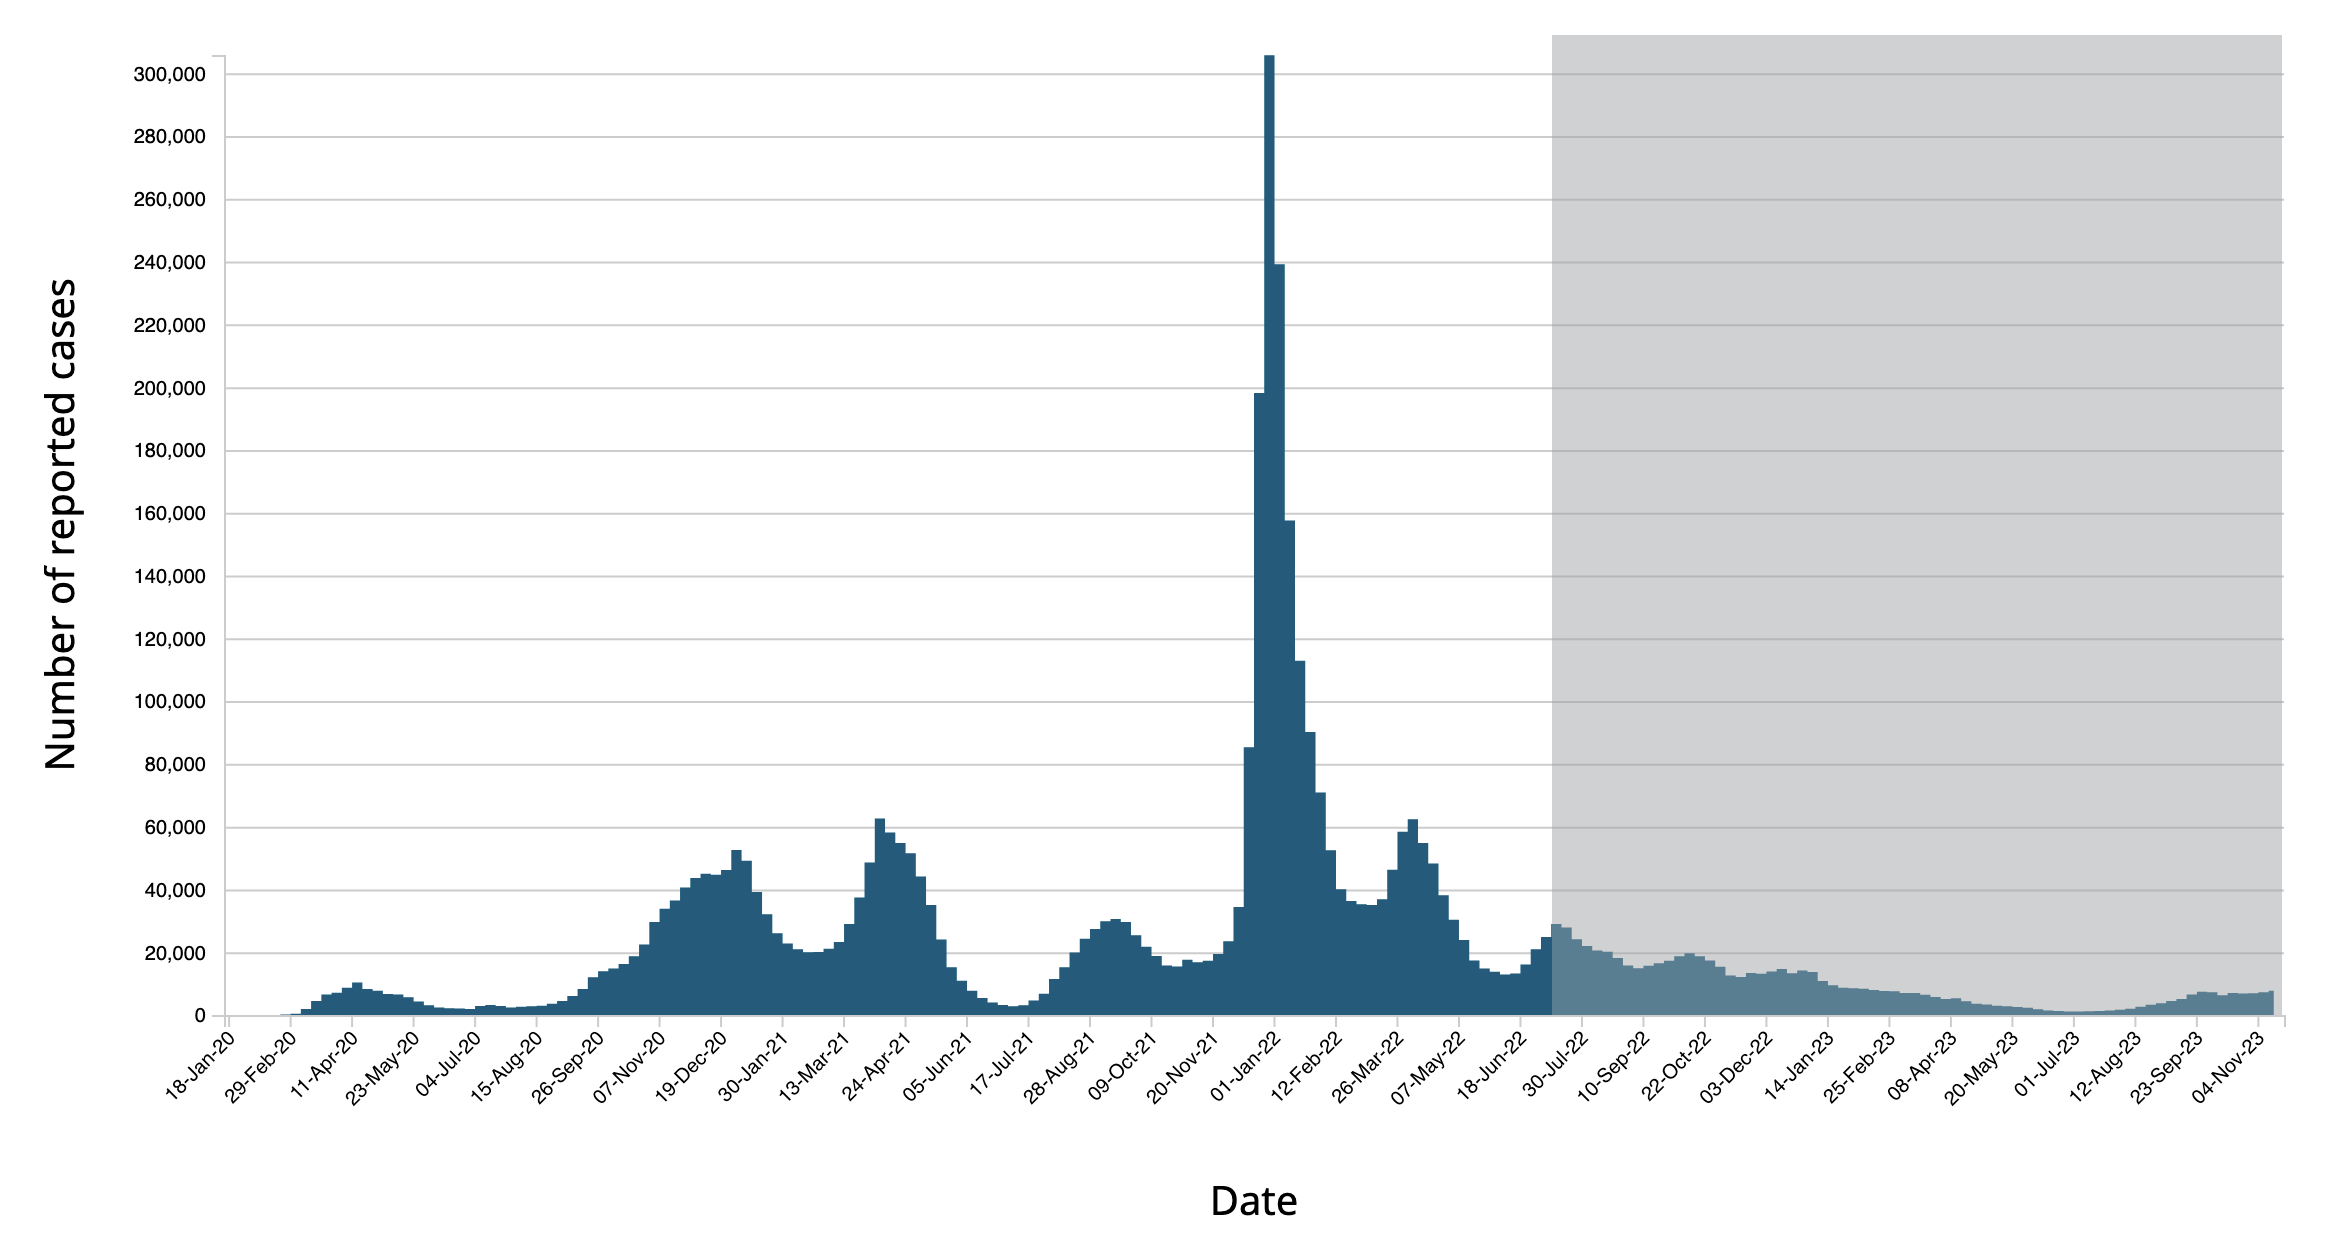 A bar graph with vertical bars depicting the number of COVID-19 cases over time.